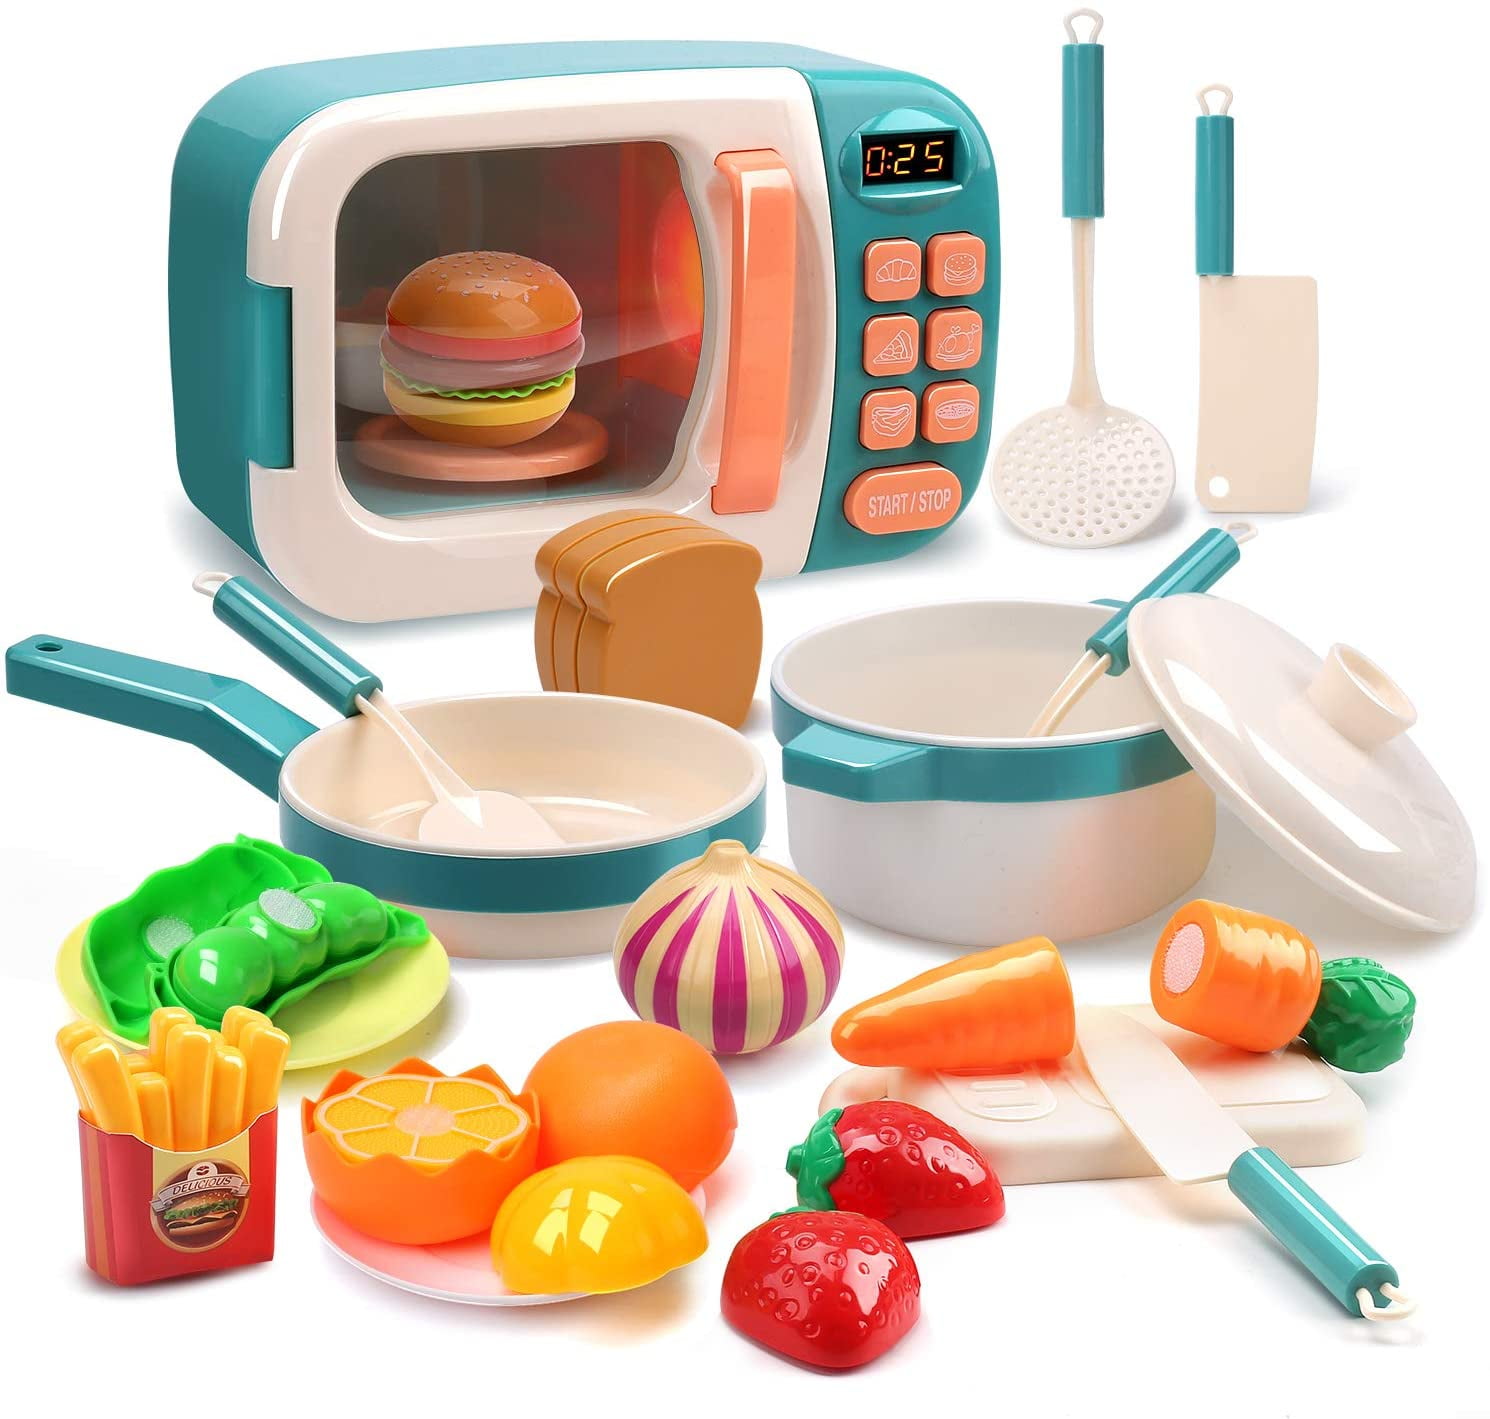 Kids Pretend Kitchen Play Set Toy Food Cooking Toddler Toys Gift Playset Gifts H 